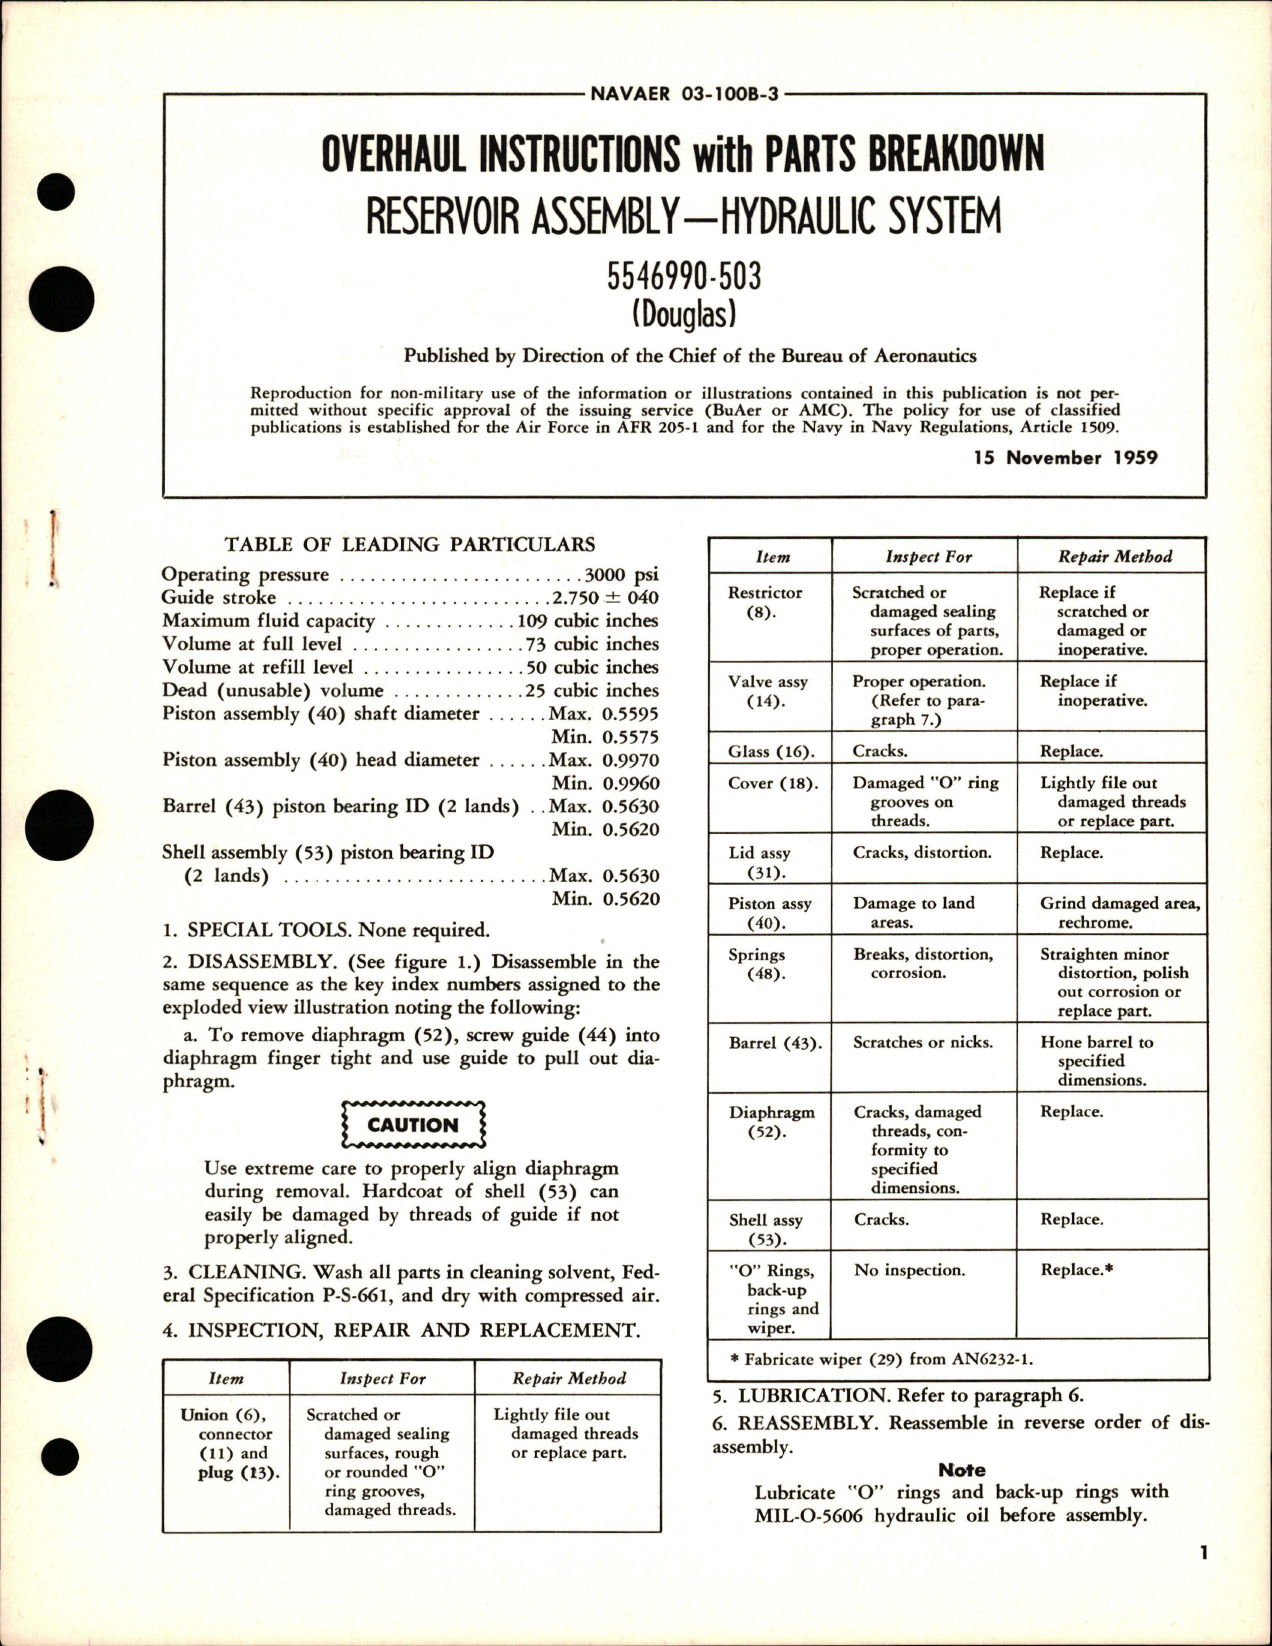 Sample page 1 from AirCorps Library document: Overhaul Instructions with Parts Breakdown for Hydraulic System Reservoir Assembly - 5546990-503